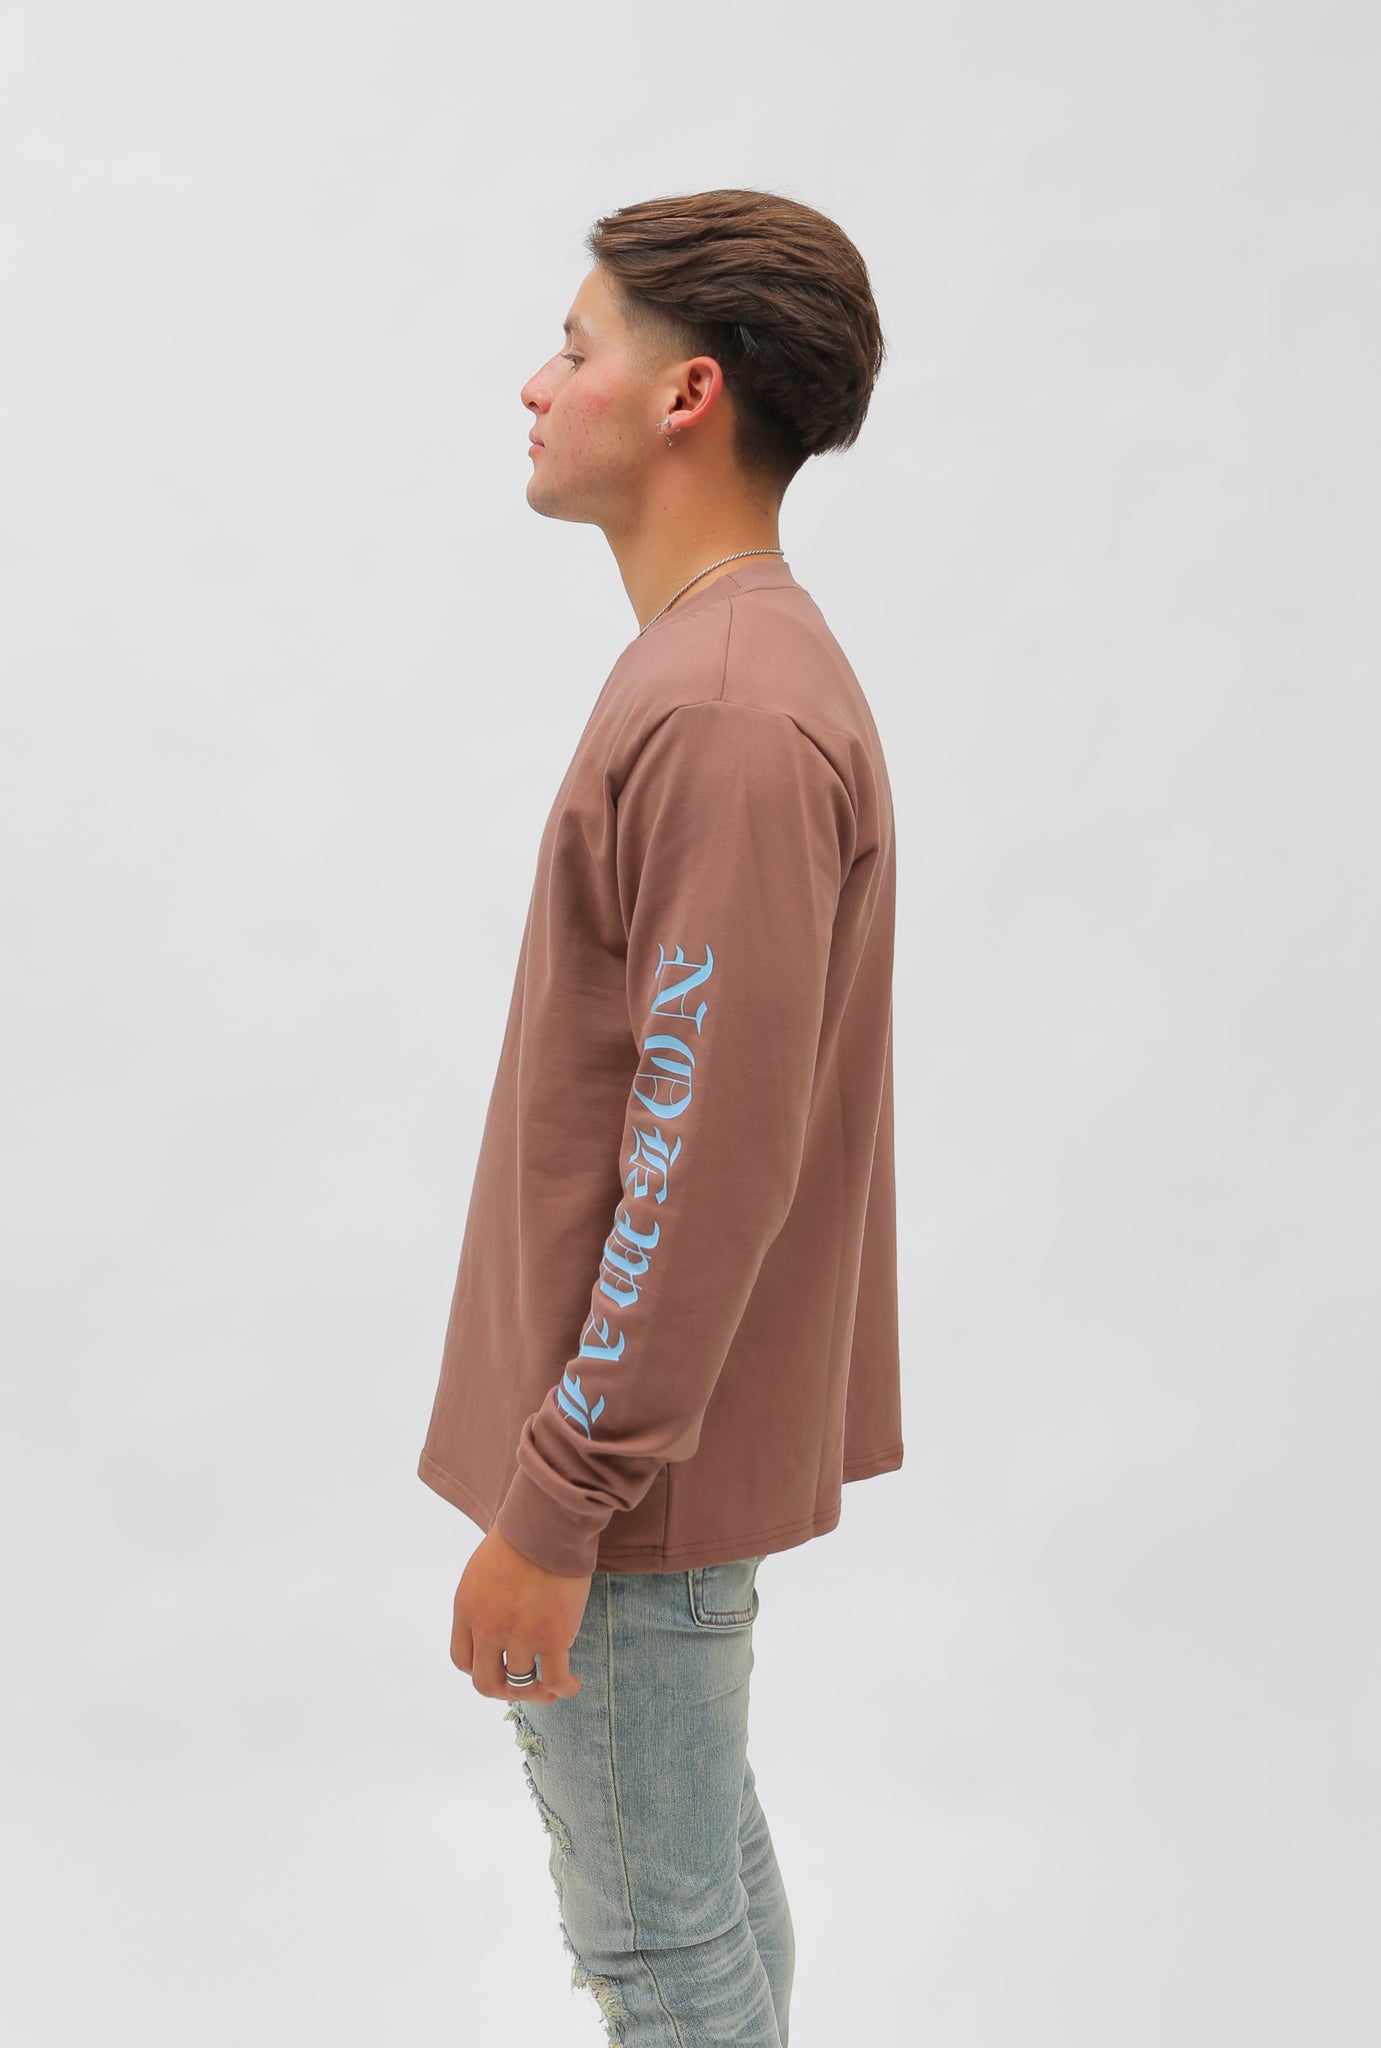 Brown Long Sleeve Forever Nokwal T-Shirt (XL, 3XL Only)